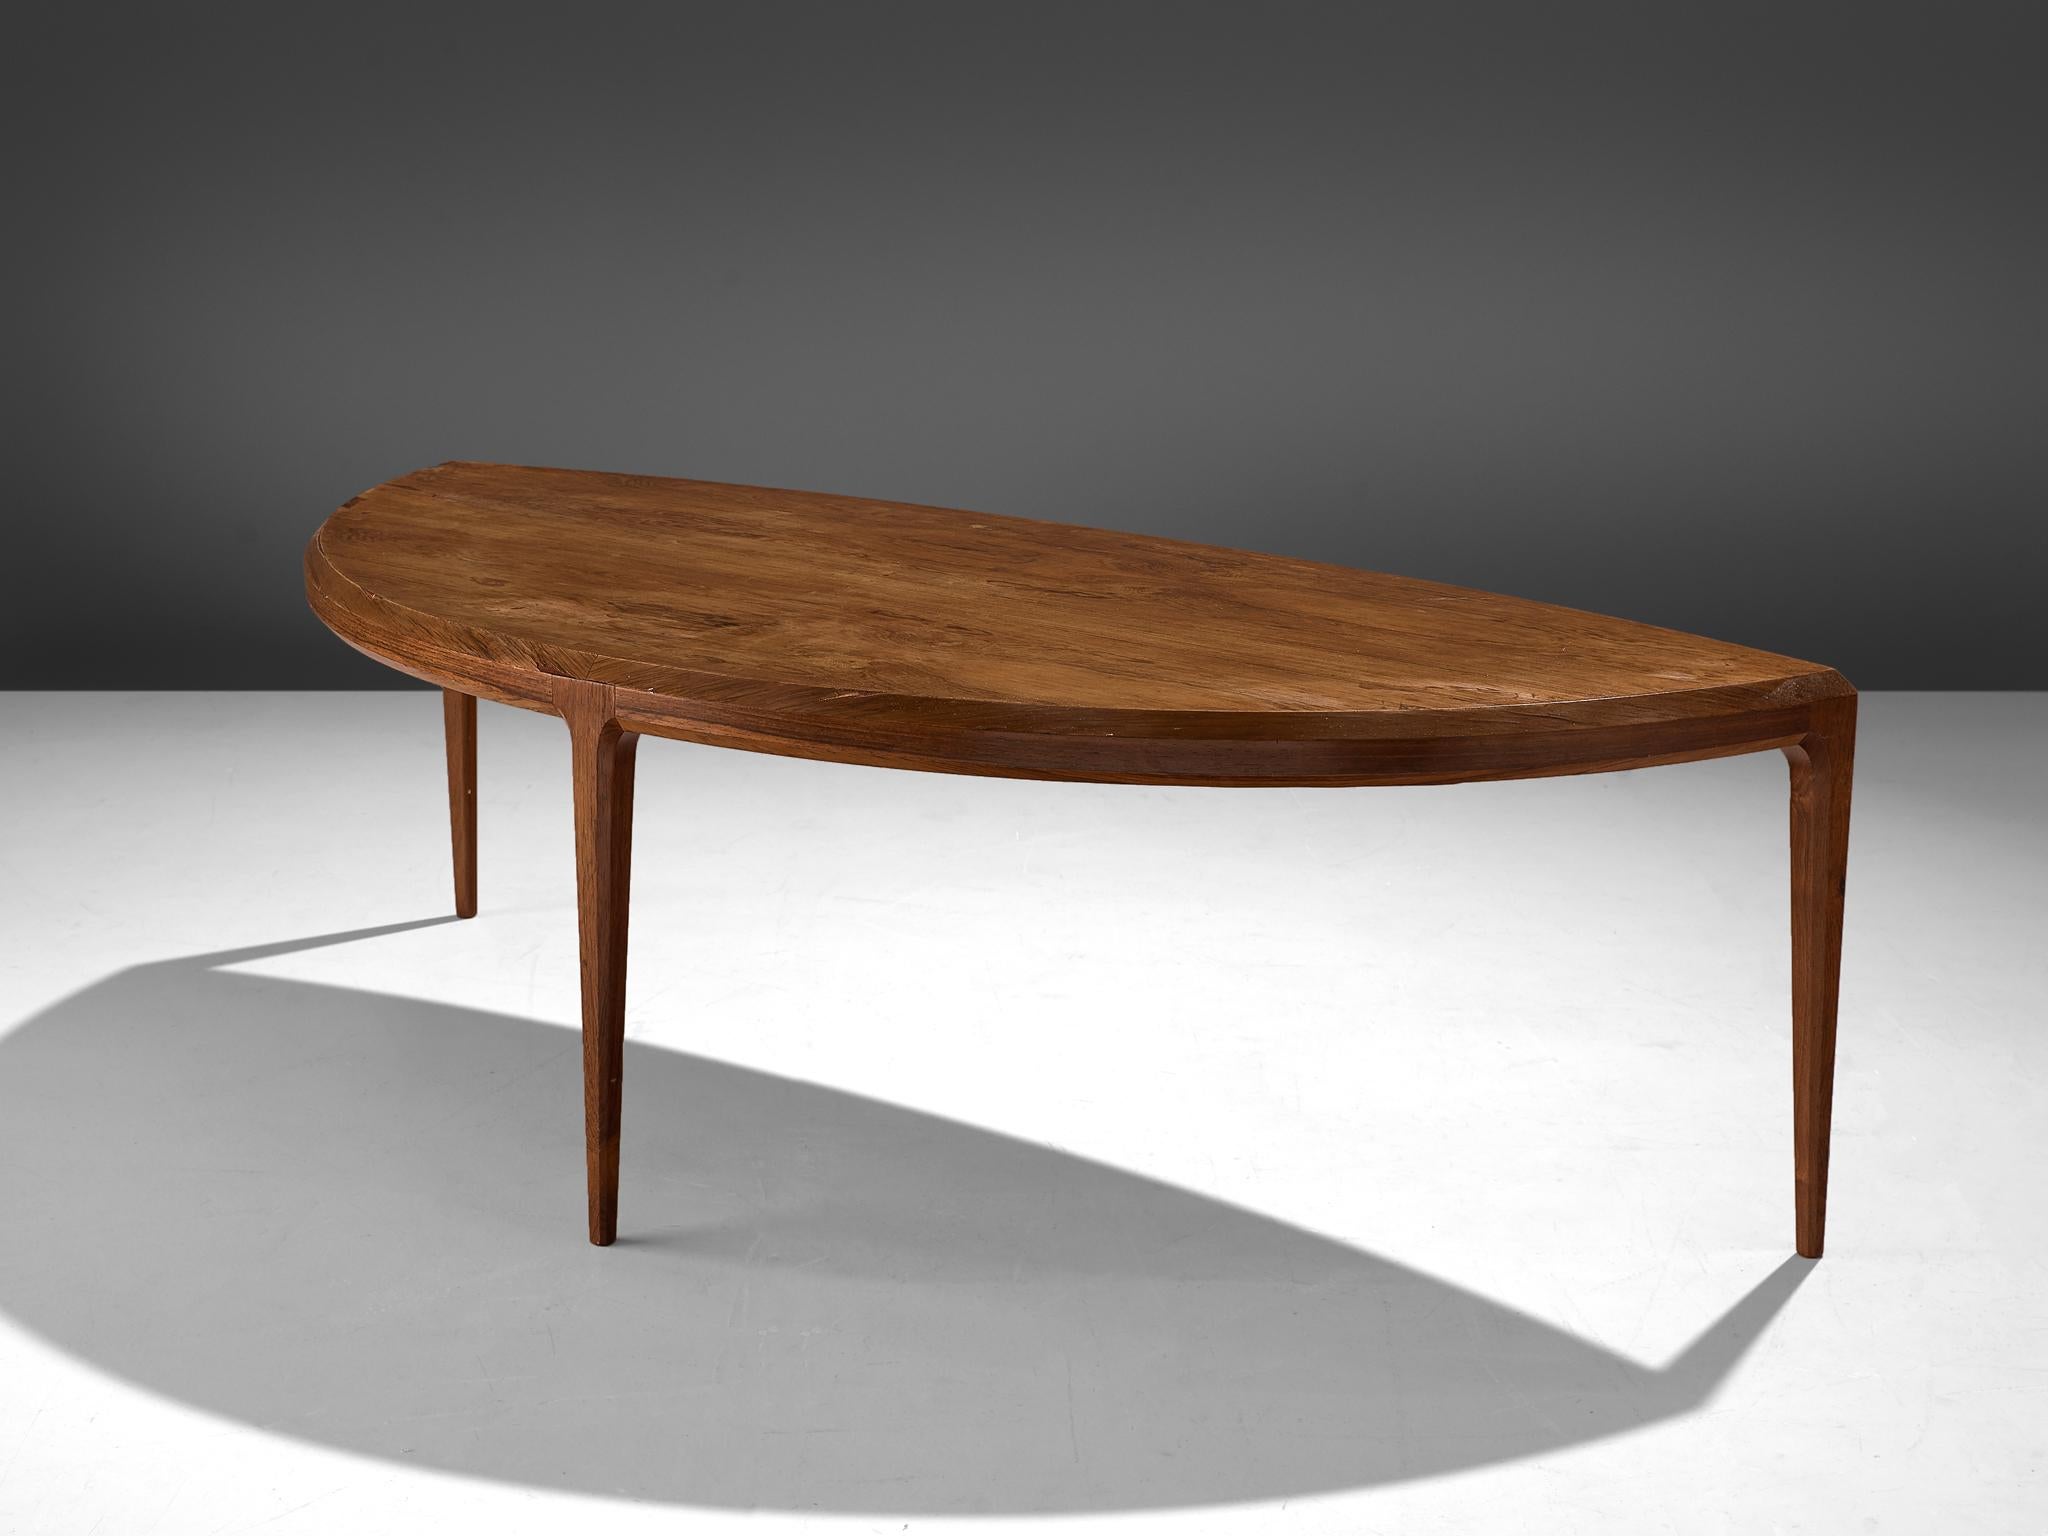 Johannes Andersen for Silkenborg, coffee table, rosewood, Denmark, 1950s.

Organic shaped coffee table in rosewood. This three legged coffee table shows the great craftsmanship of Johannes Andersen as furniture designer. The design is simplified,